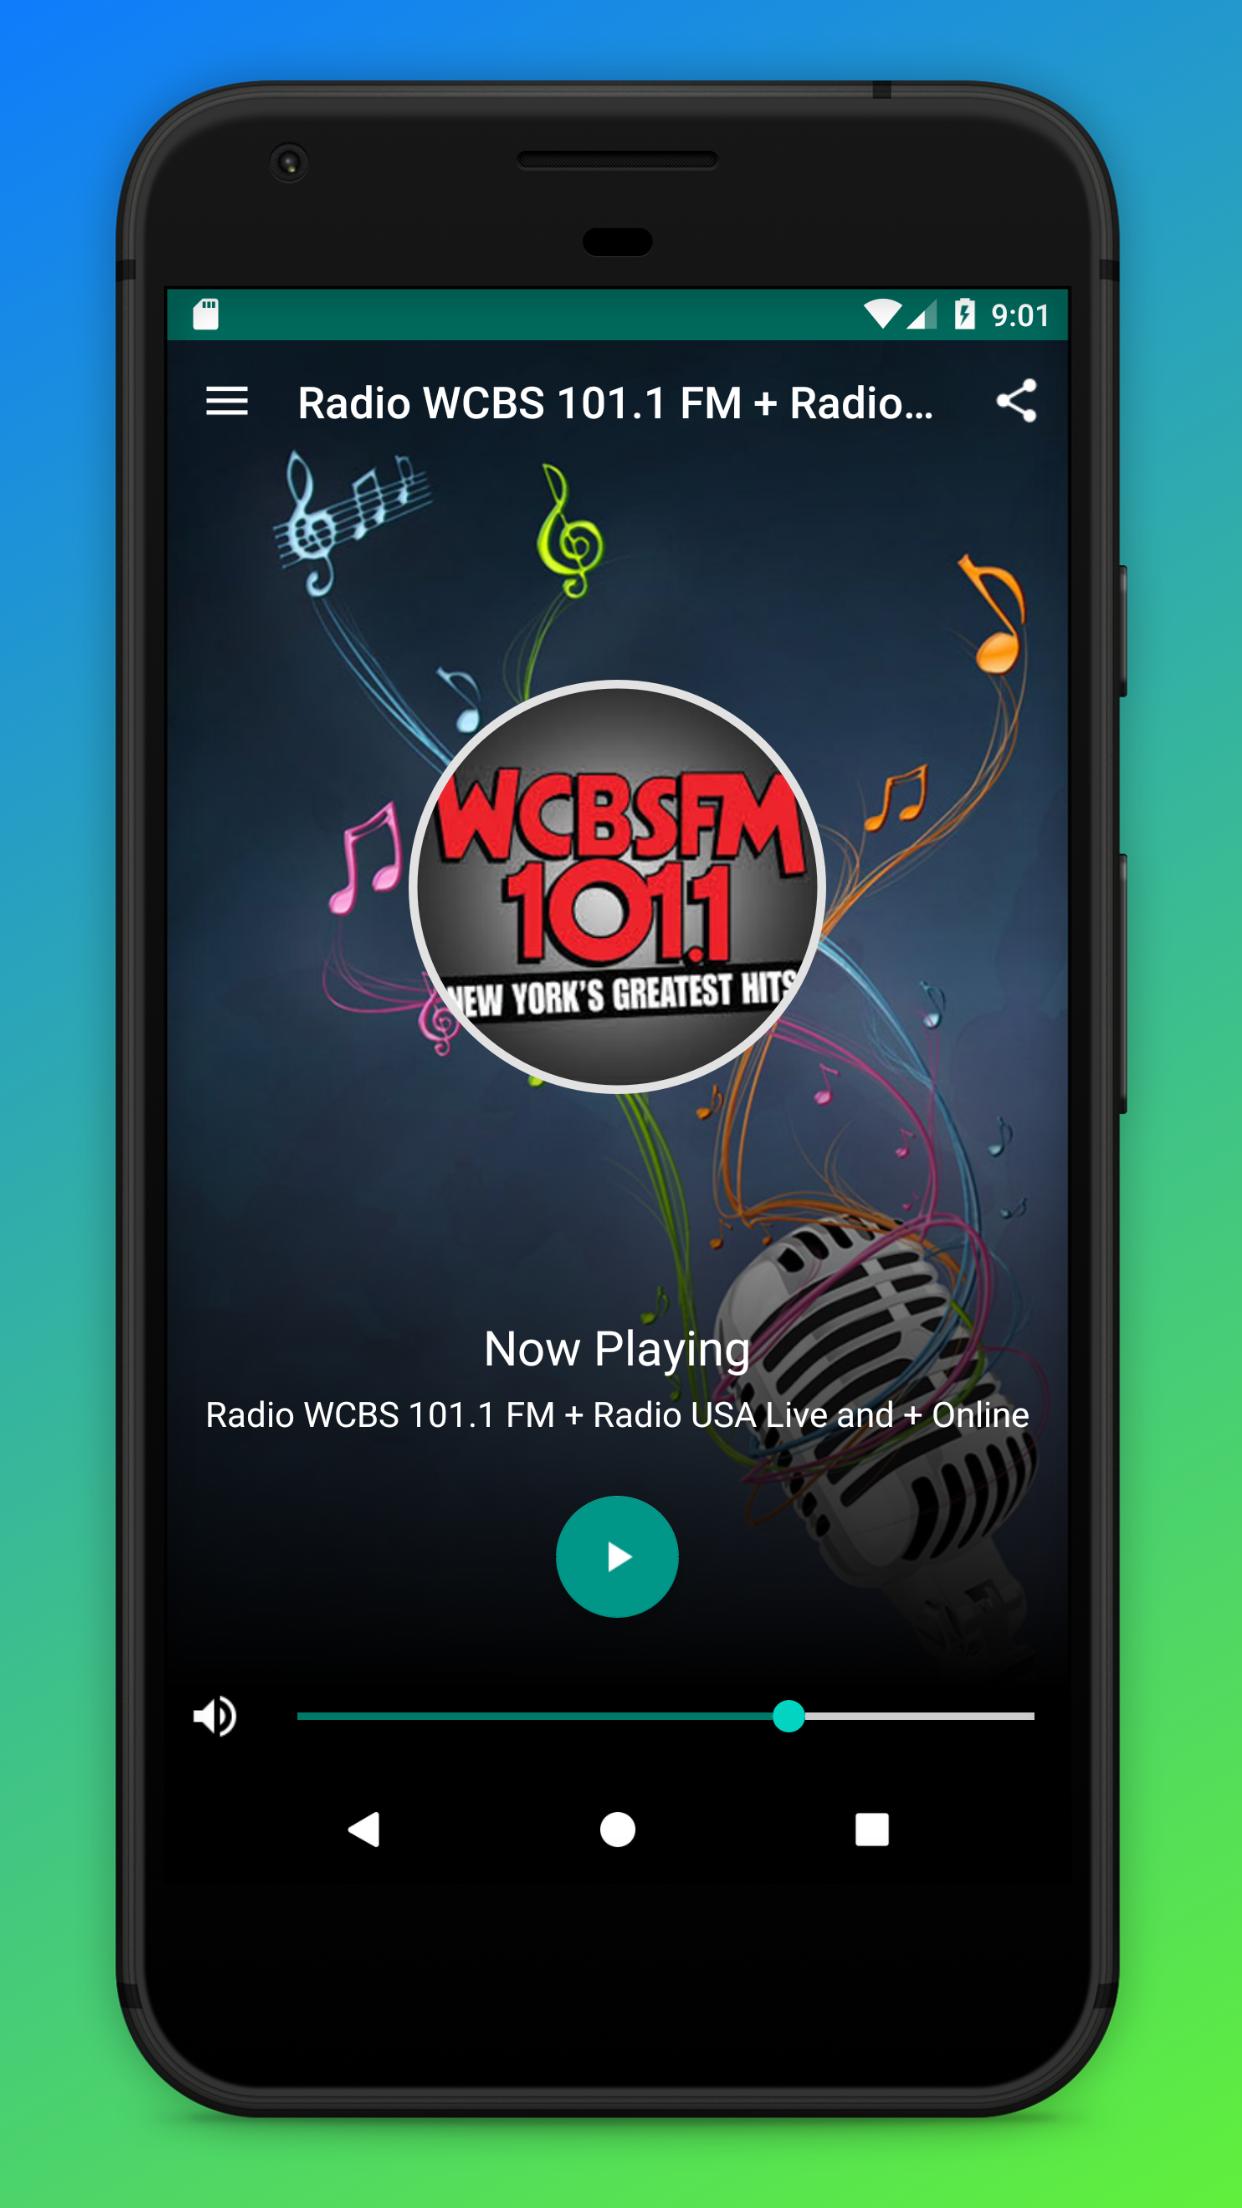 Radio WCBS 101.1 FM + Radio USA Live and + Online for Android - APK Download